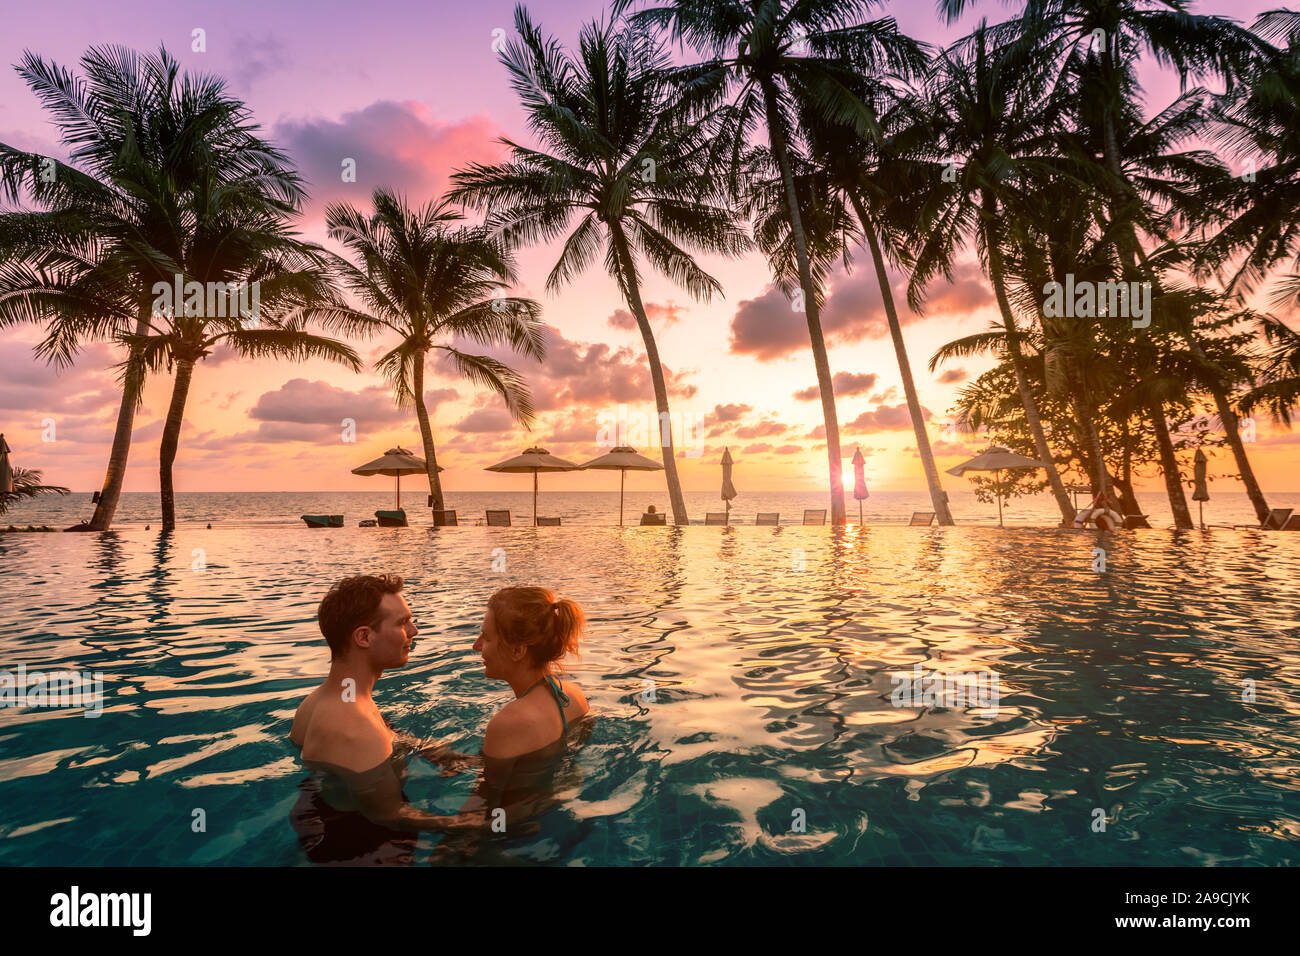 Couple at beach vacation holidays resort relaxing in swimming pool with scenic tropical landscape at sunset, romantic summer honeymoon island destinat Stock Photo